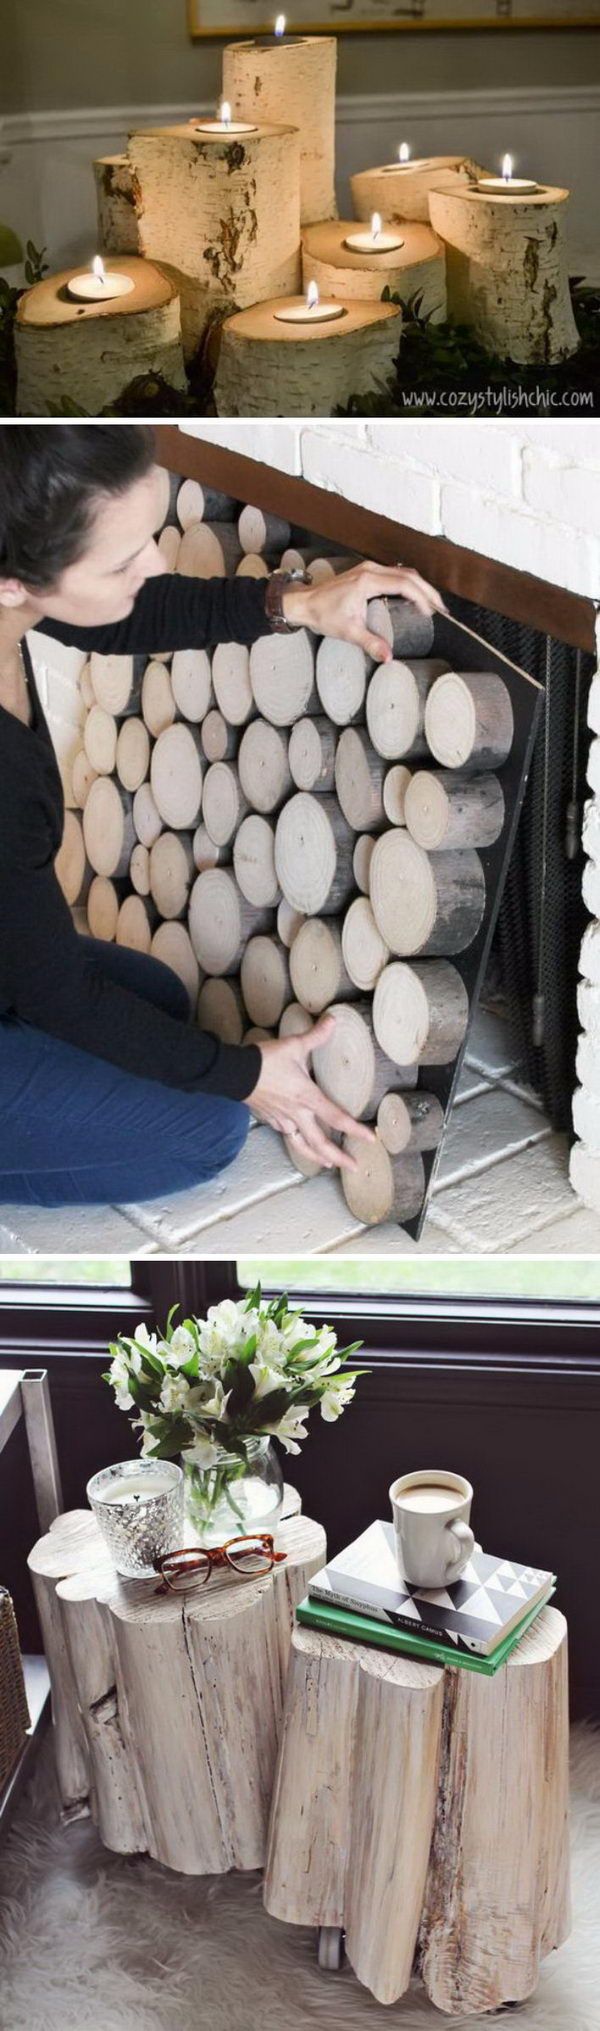 Baby Proof Fireplace Cover Lovely 20 Cool Tree Stump and Log Diy Projects